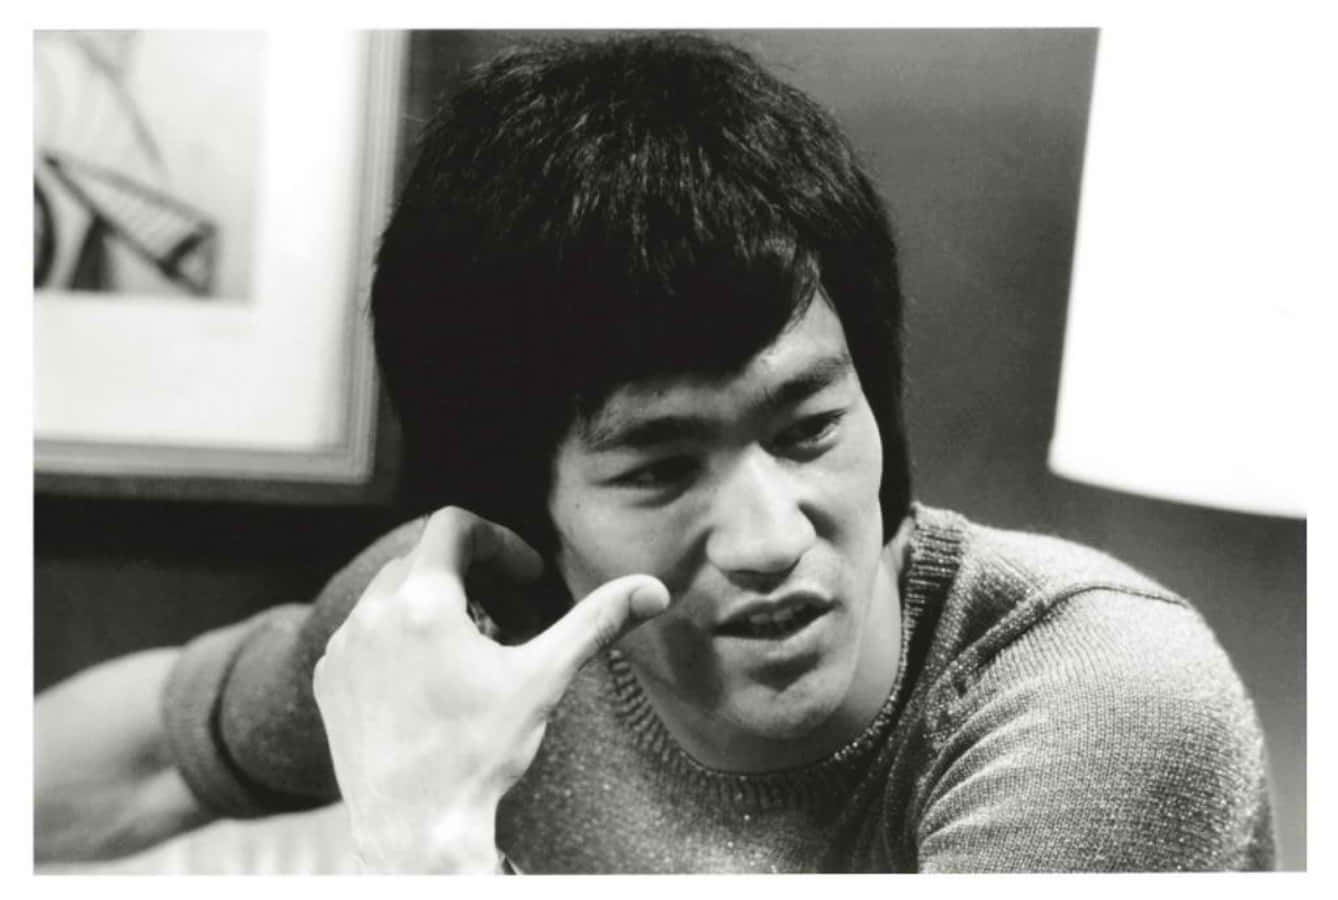 Bruce Lee strikes a classic pose demonstrating his signature fighting style